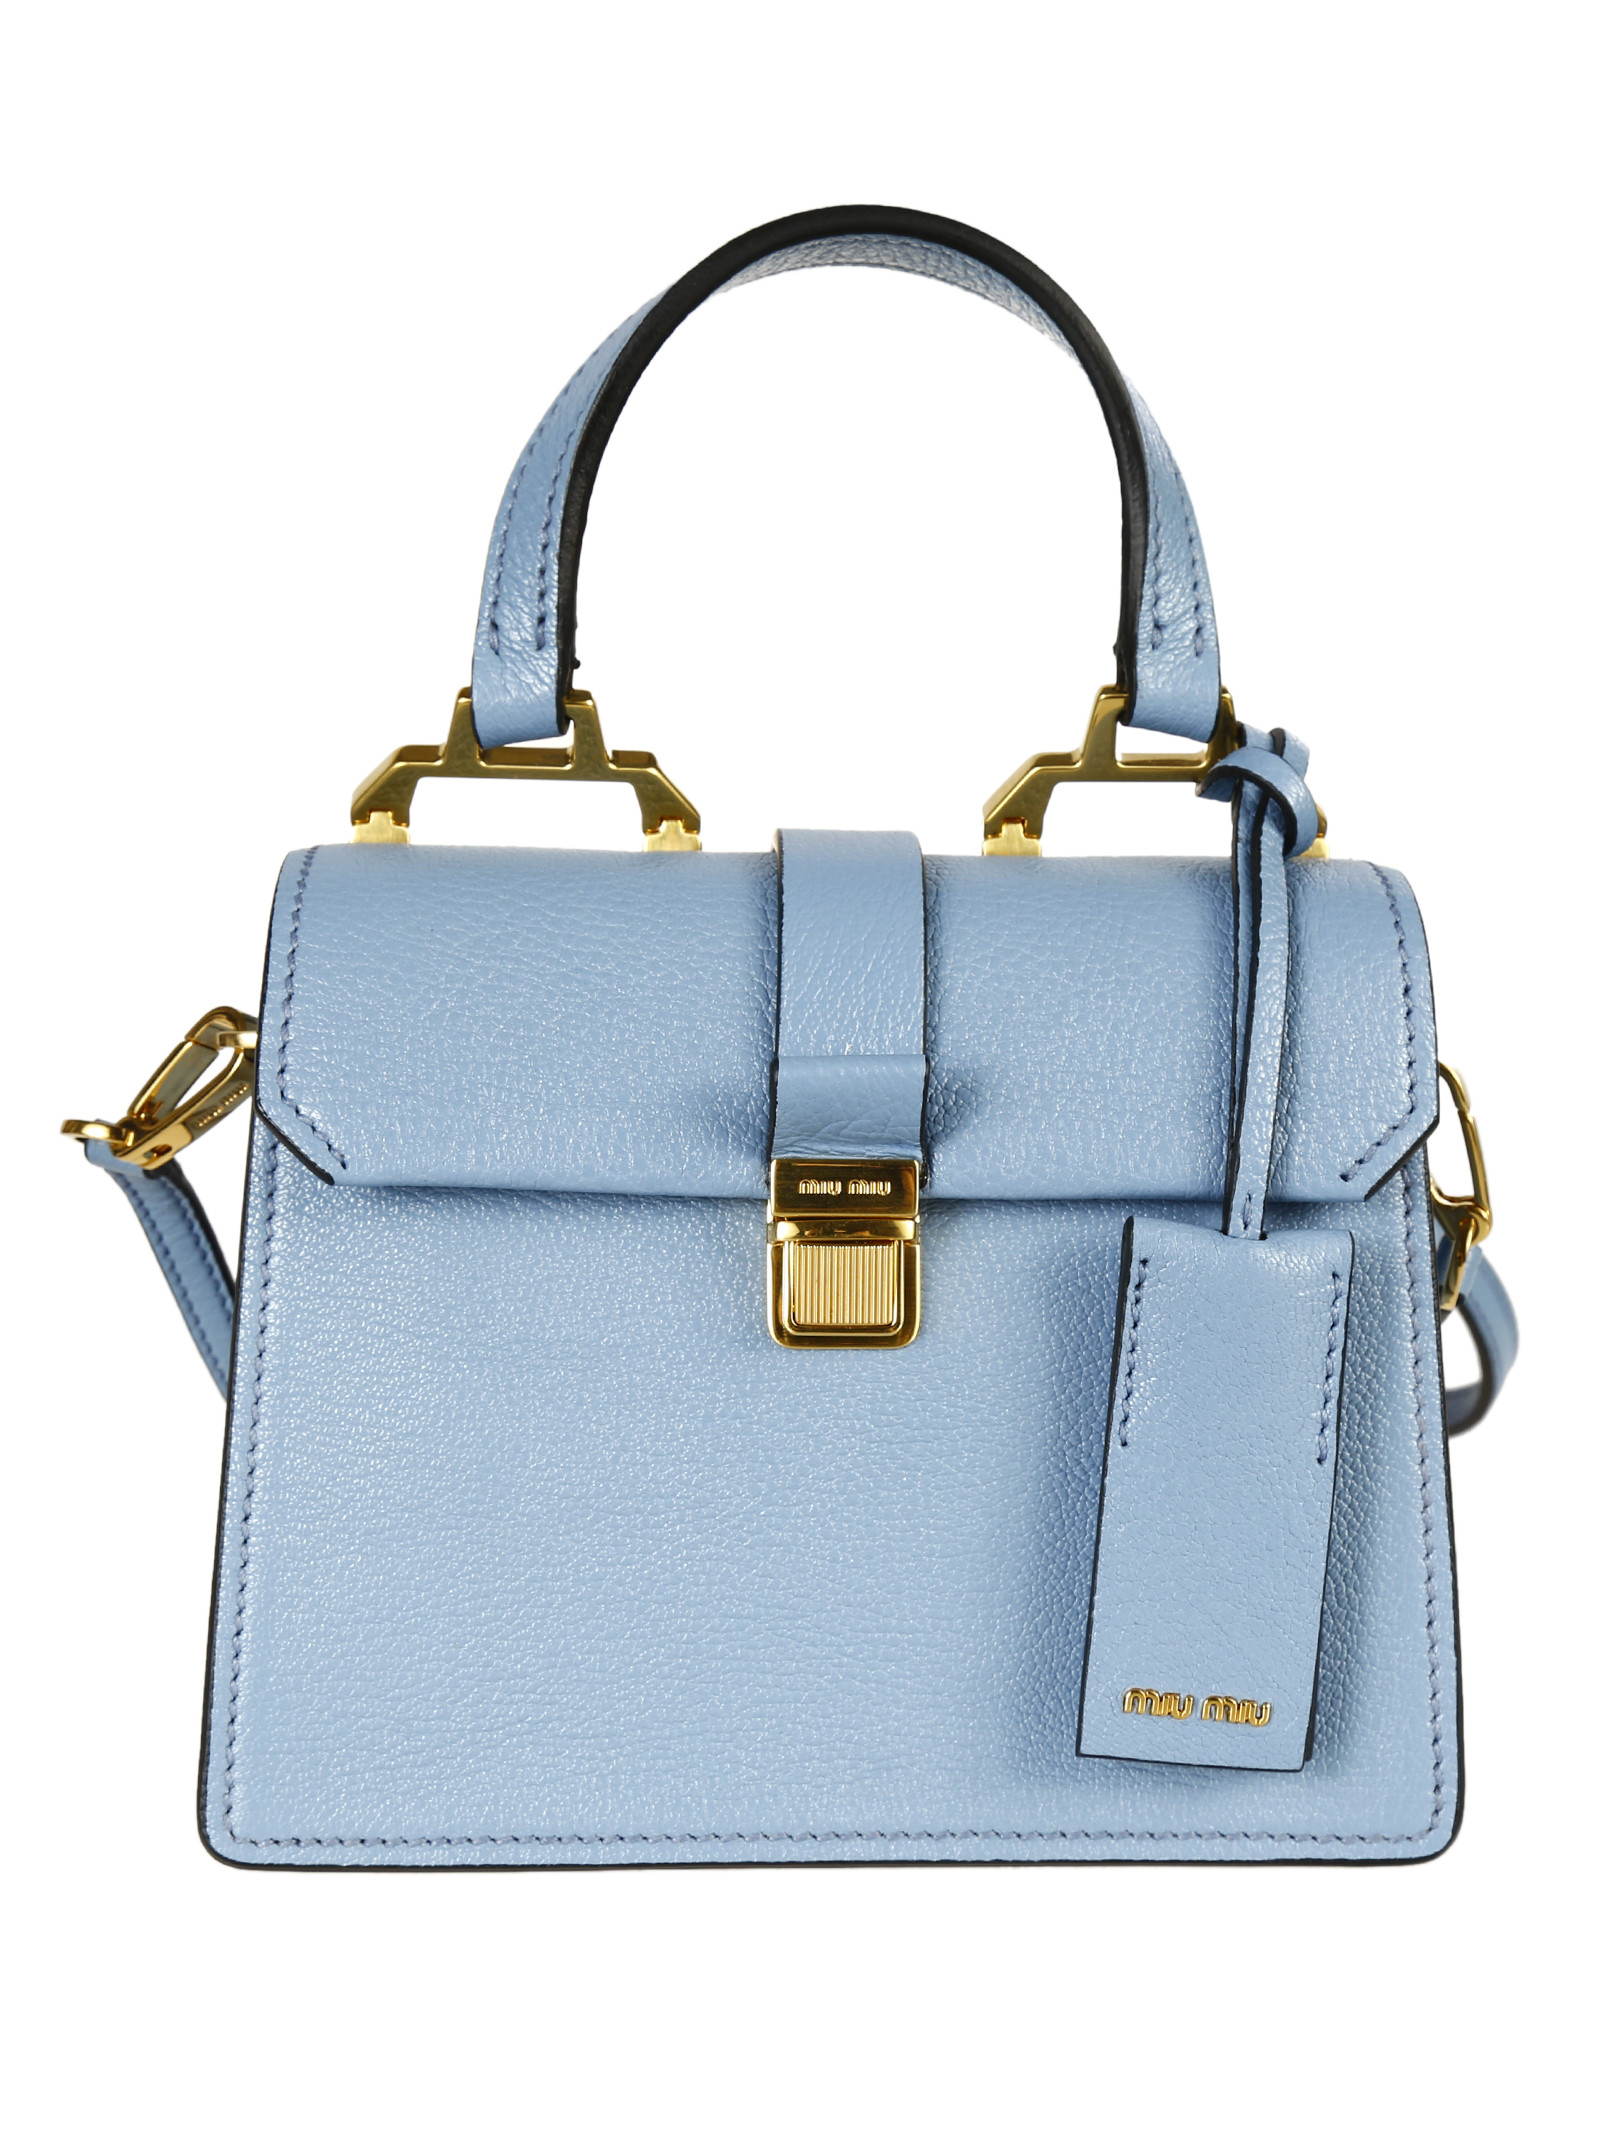 Miu miu Madras Textured Leather Shoulder Bag in Blue (Astrale) | Lyst